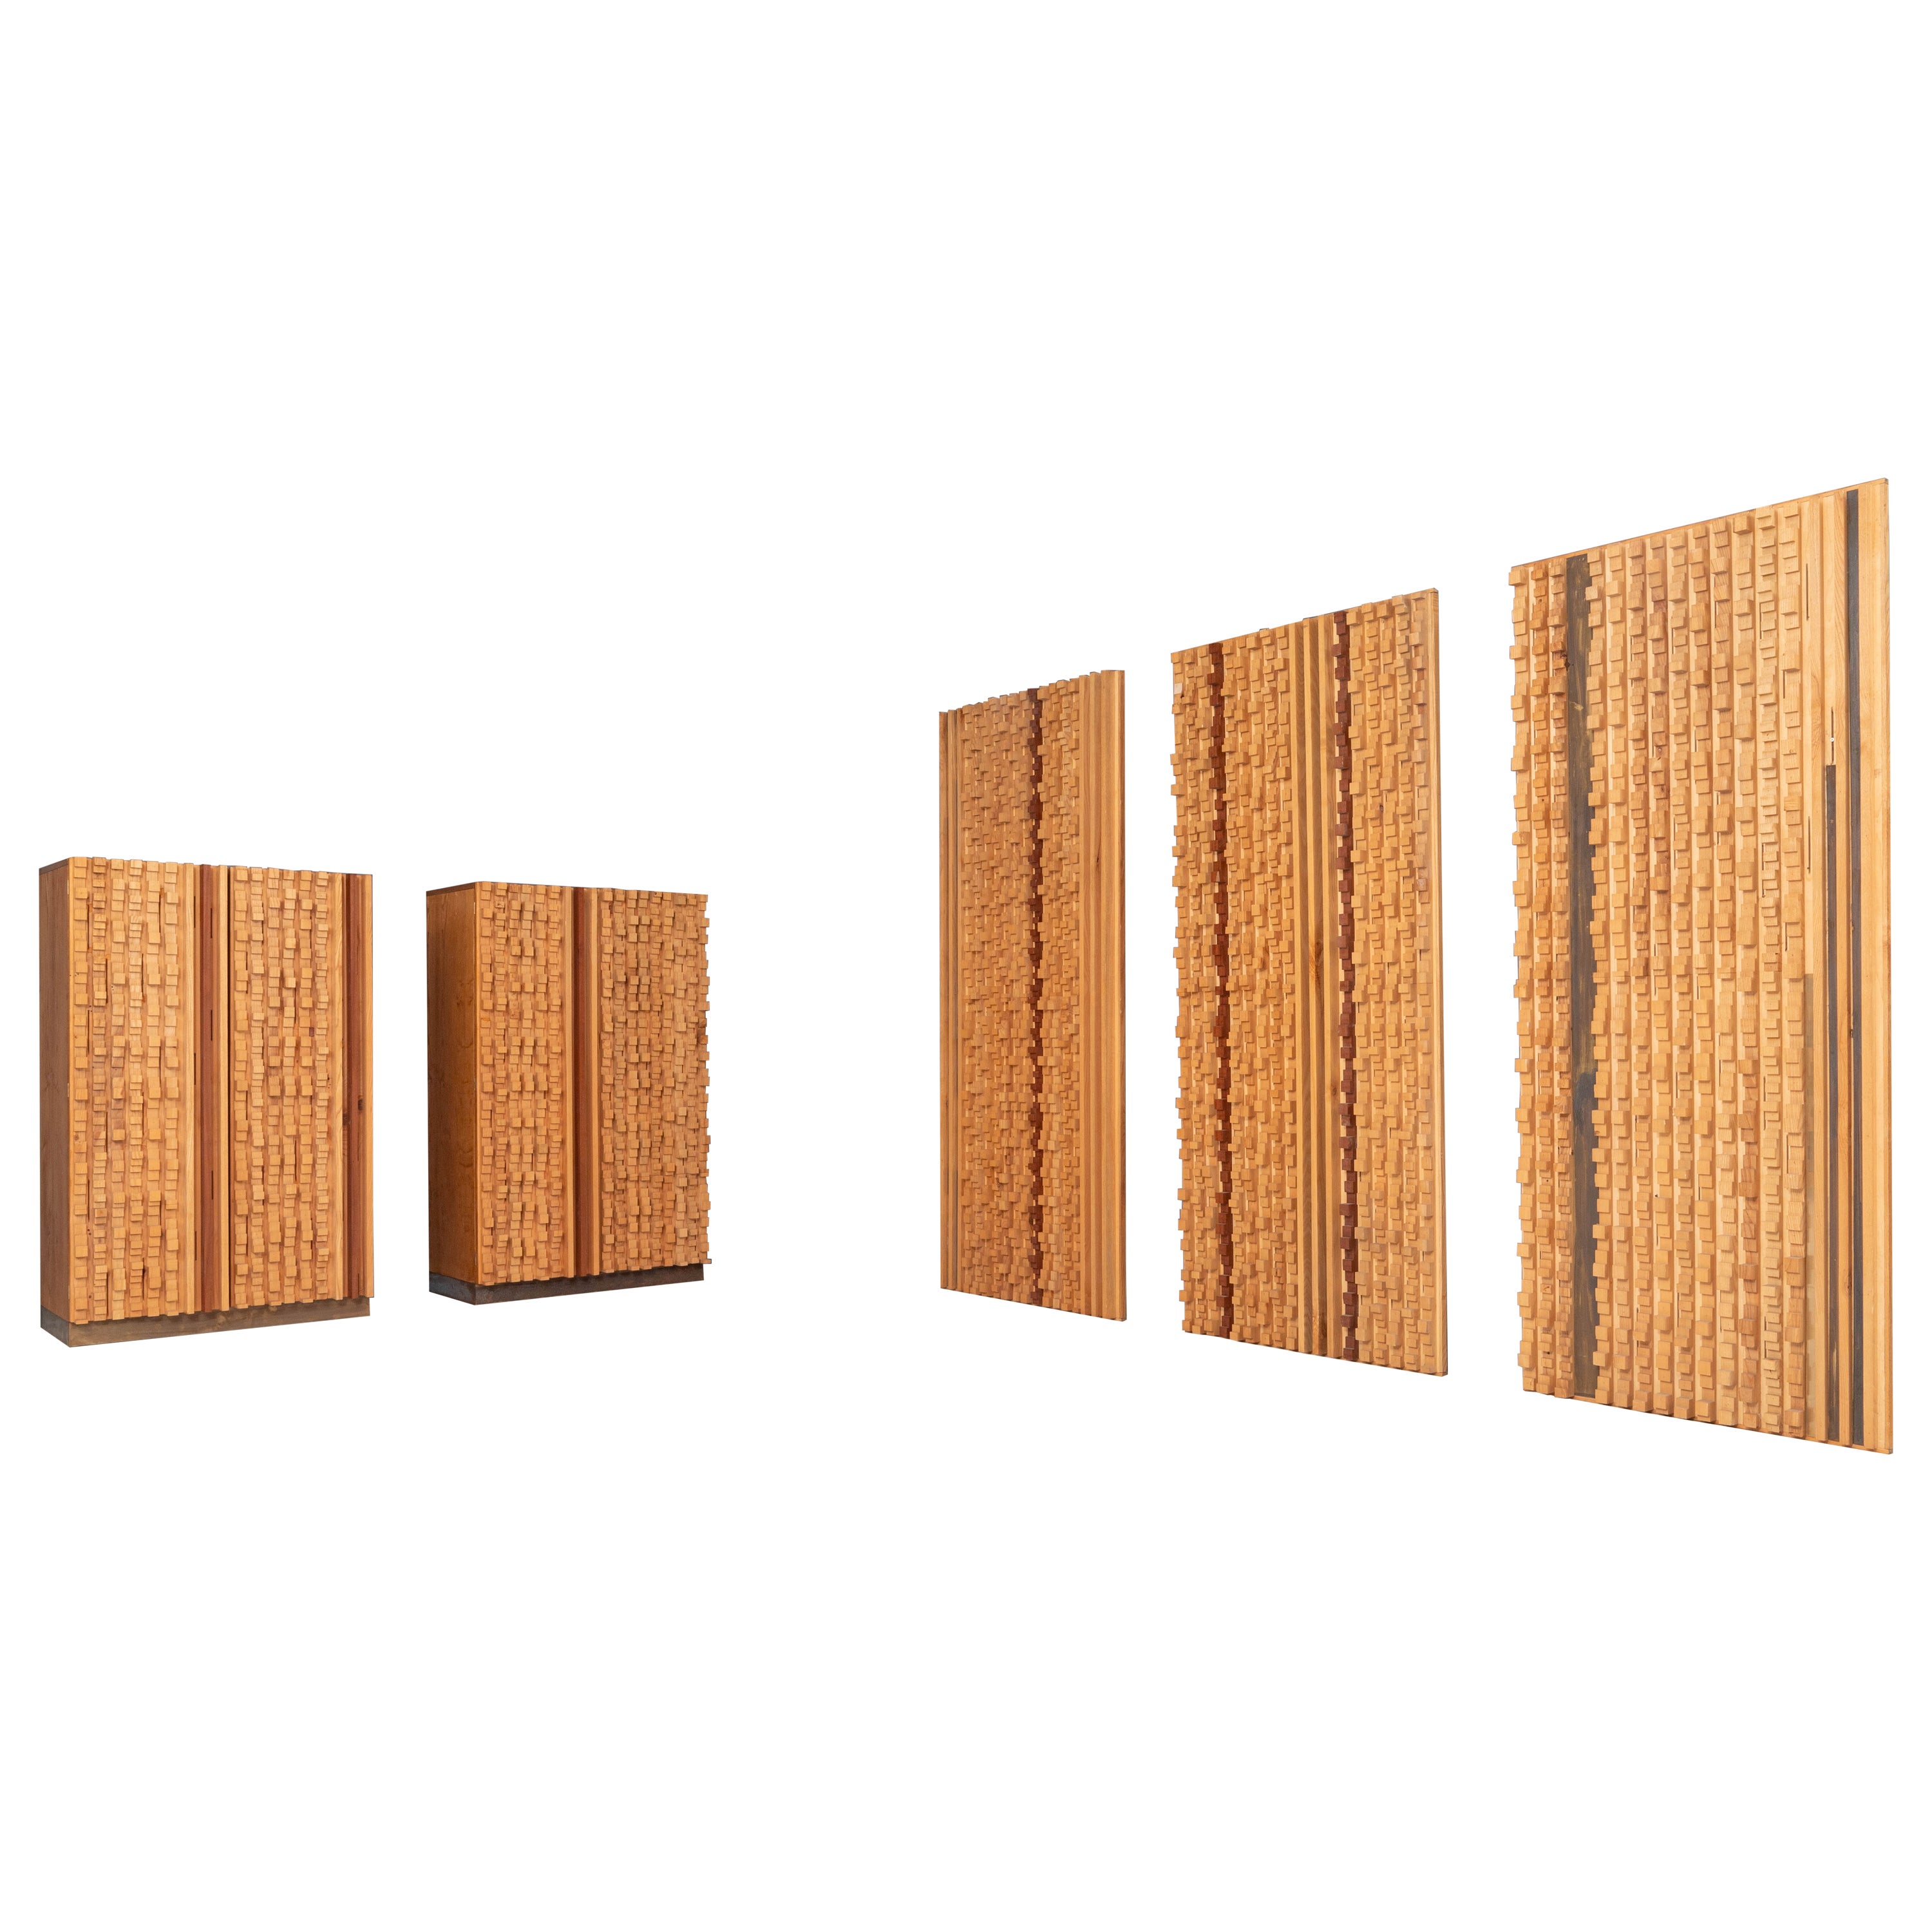 Set of 3 Wall Panels and 2 Cabinets by Stefano d'Amico, Italy, 1975 For Sale